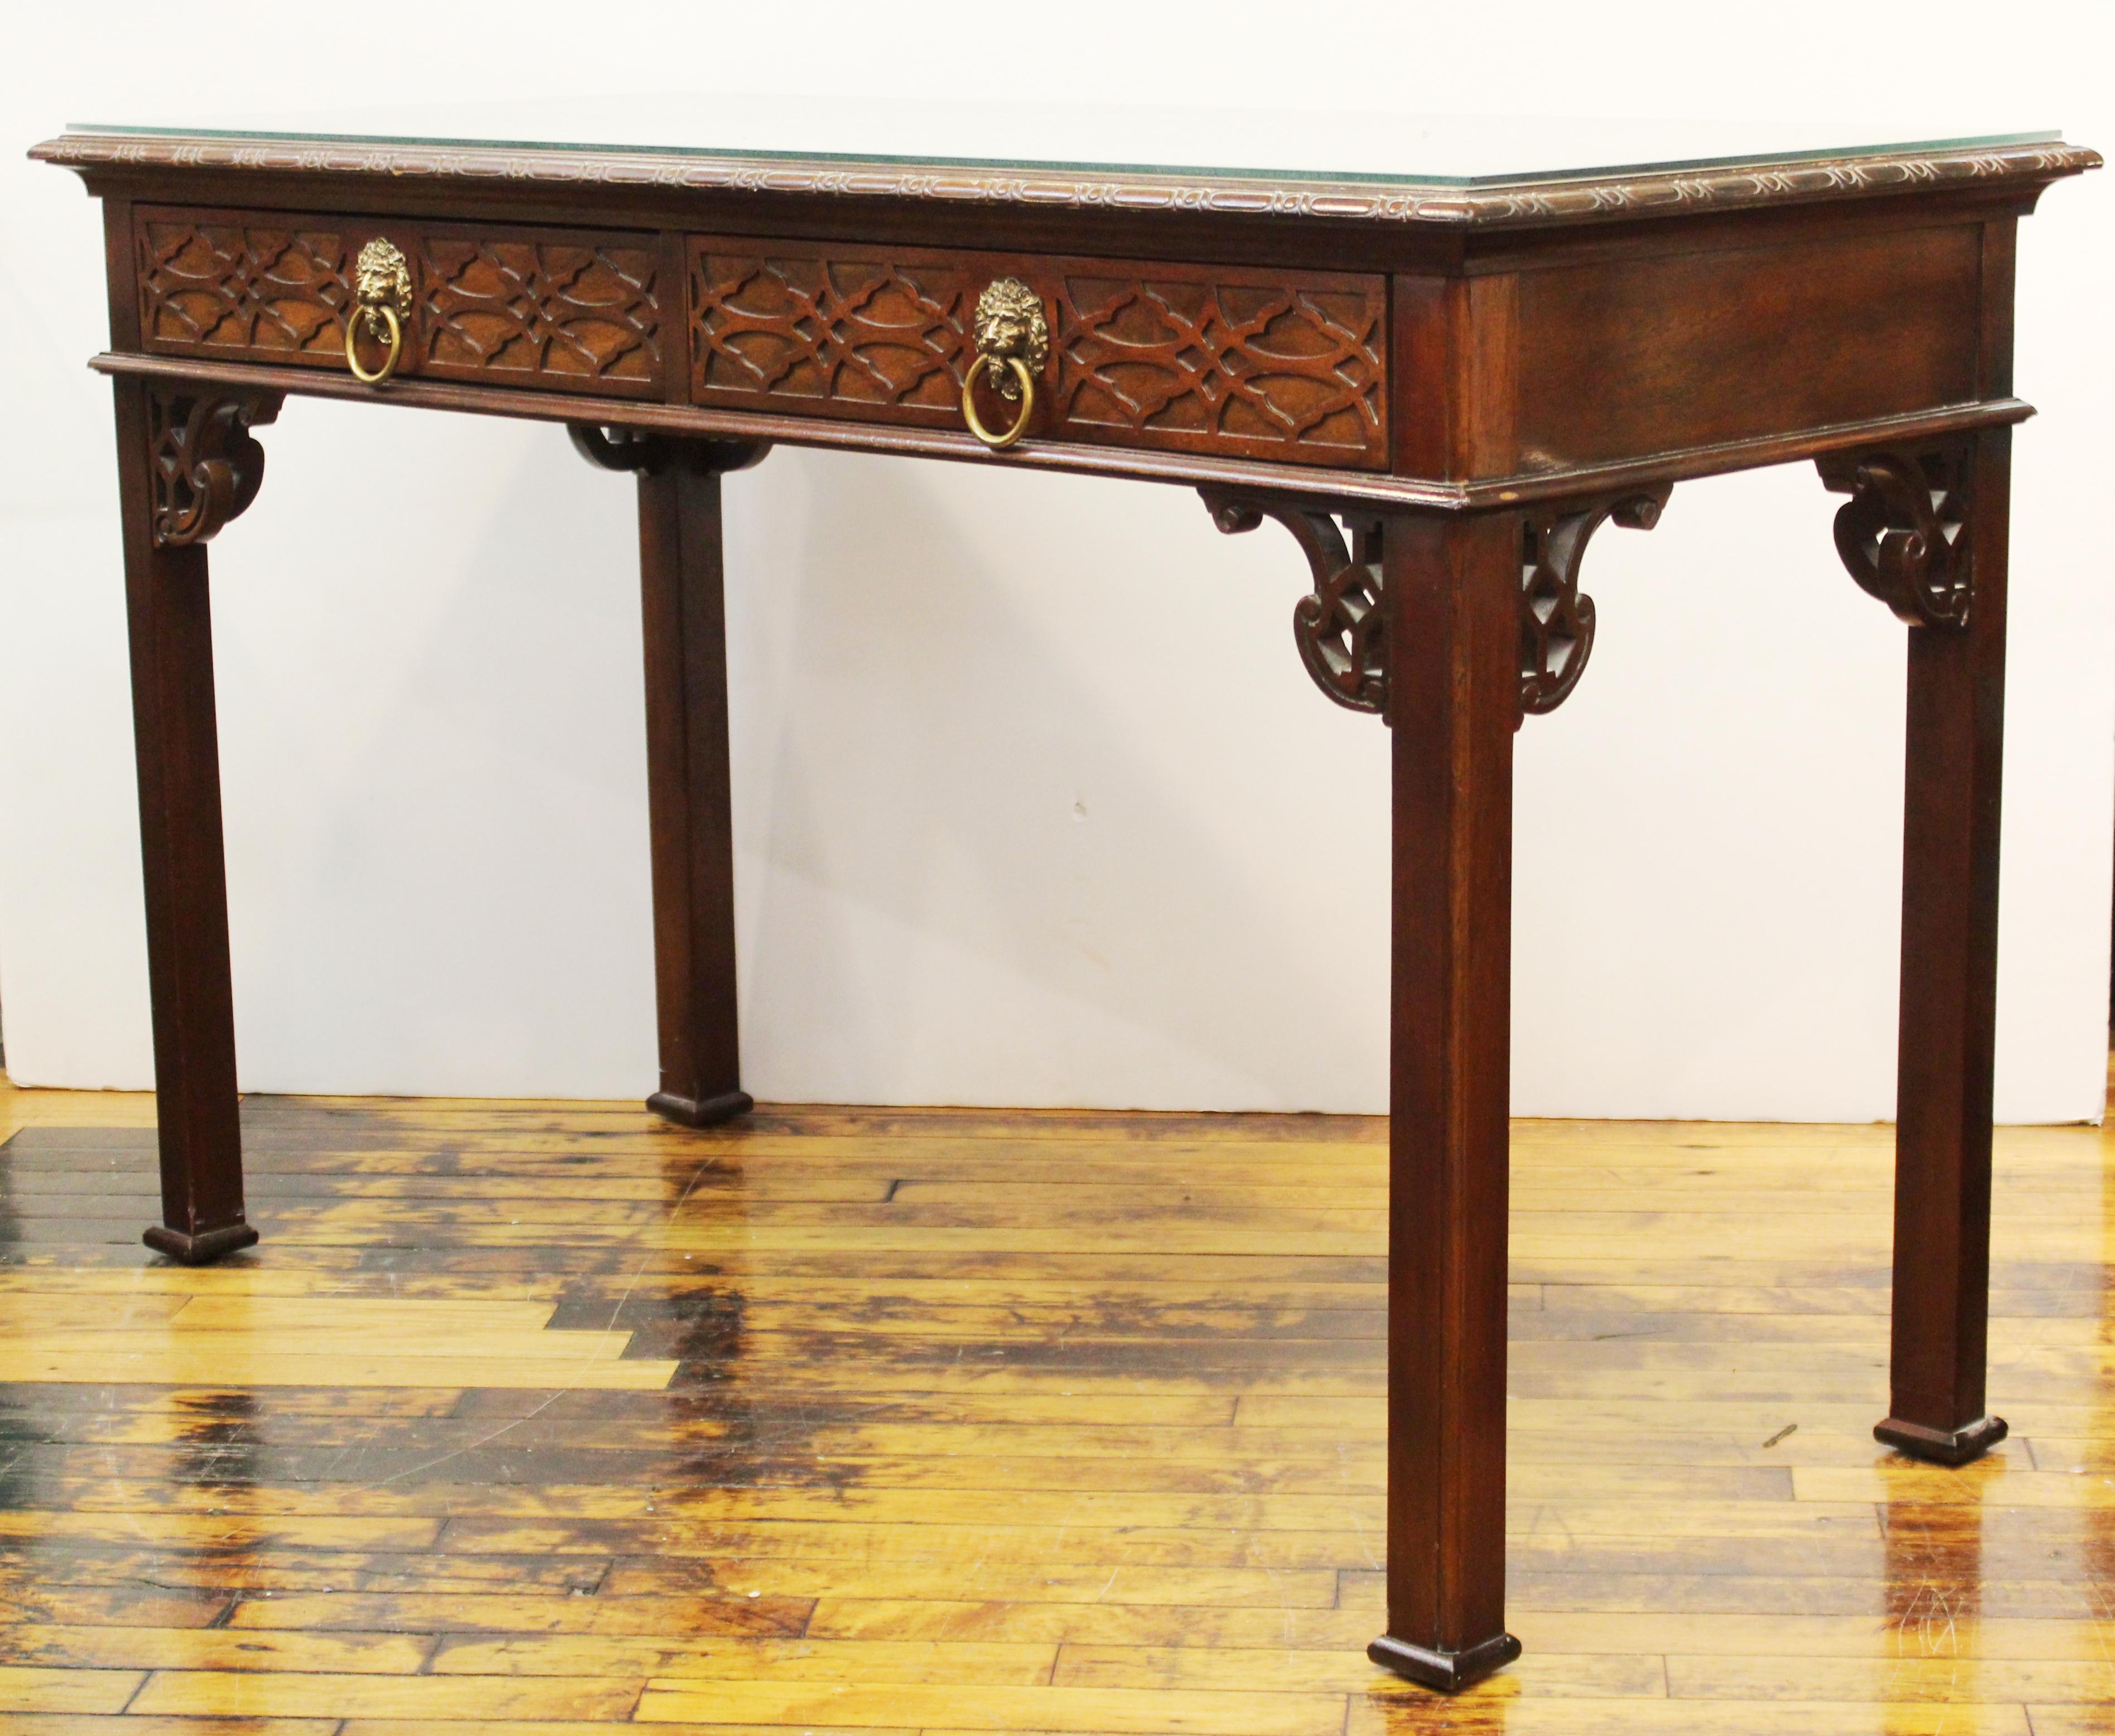 Midcentury Chinese Chippendale style writing desk or console table in mahogany finish with two drawers with lion's head pills and a removable glass top, designed by Baker Furniture Company. Metal oval plaque with makers mark located in one of the